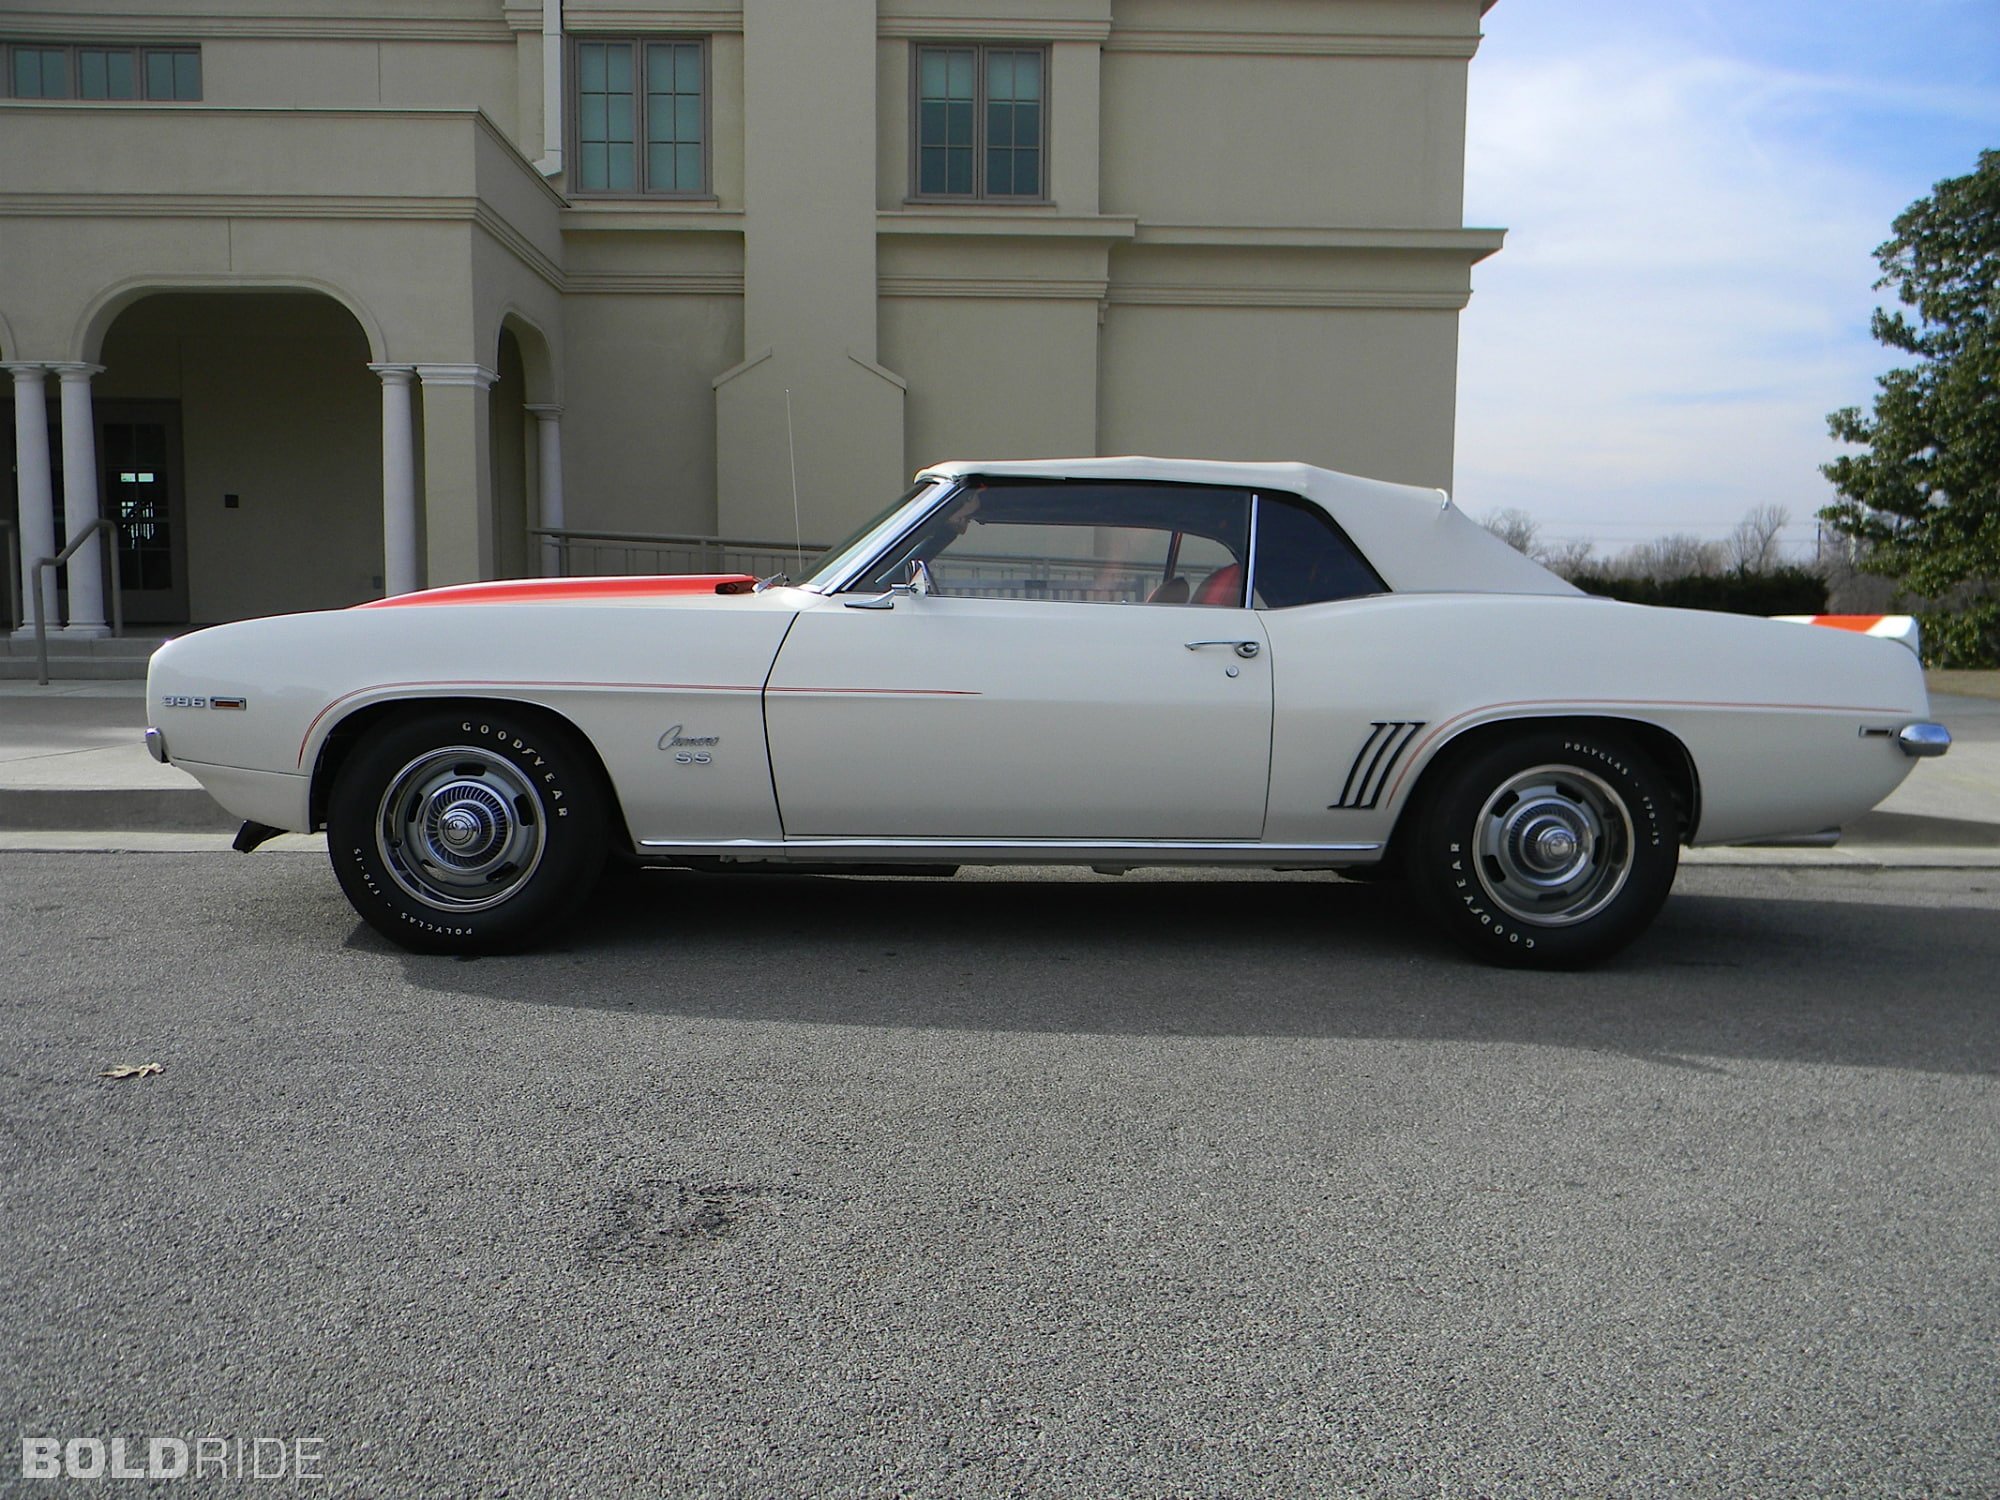 1969, camaro, chevrolet, classic, convertible, muscle, pace